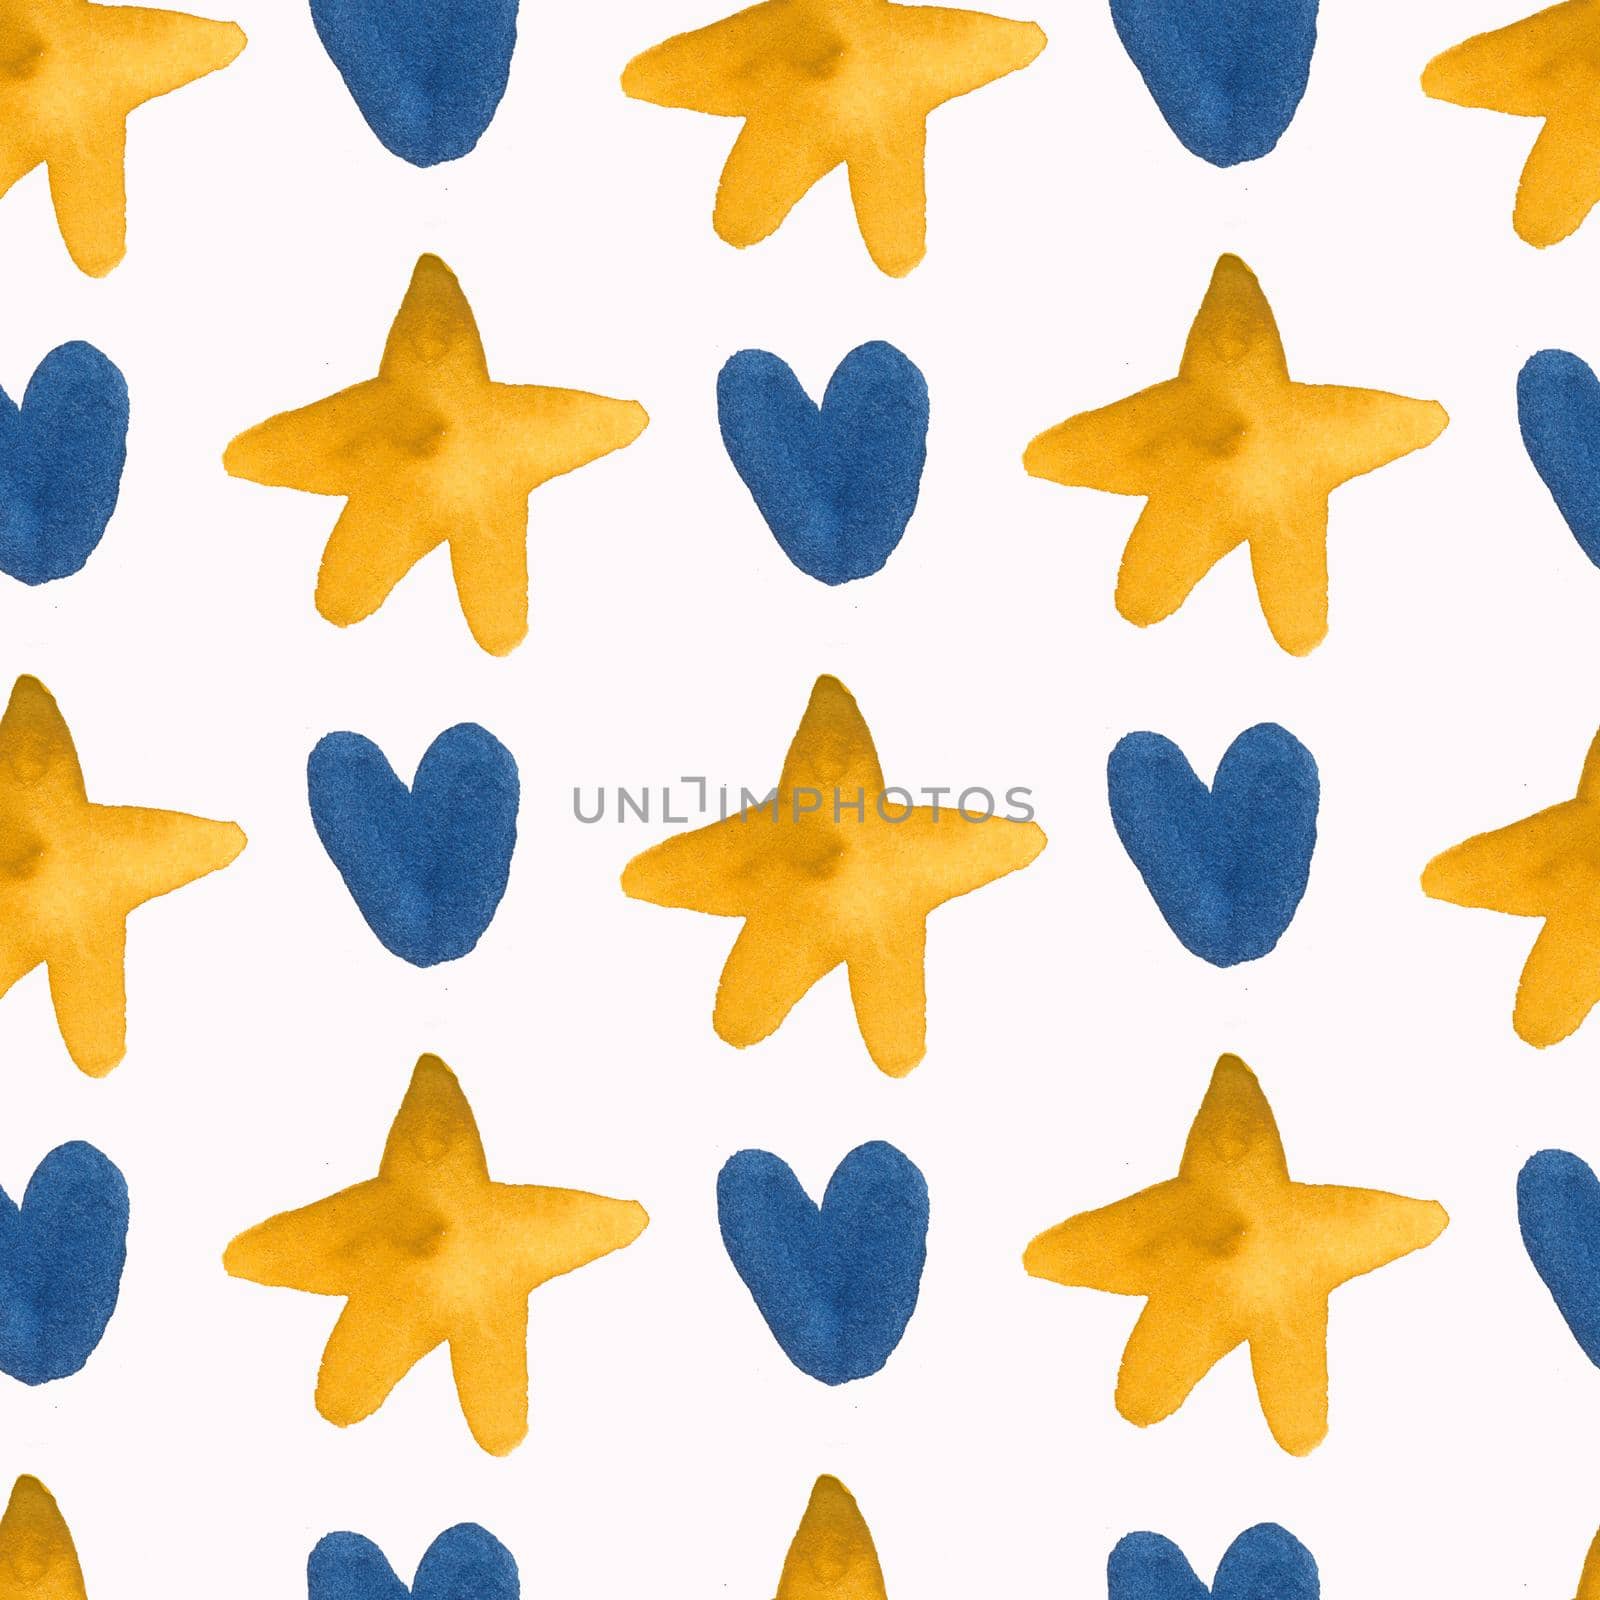 Seamless watercolor pattern of yellow stars and blue hearts. Suitable for wrapping paper, fabric drawing, banner creation.